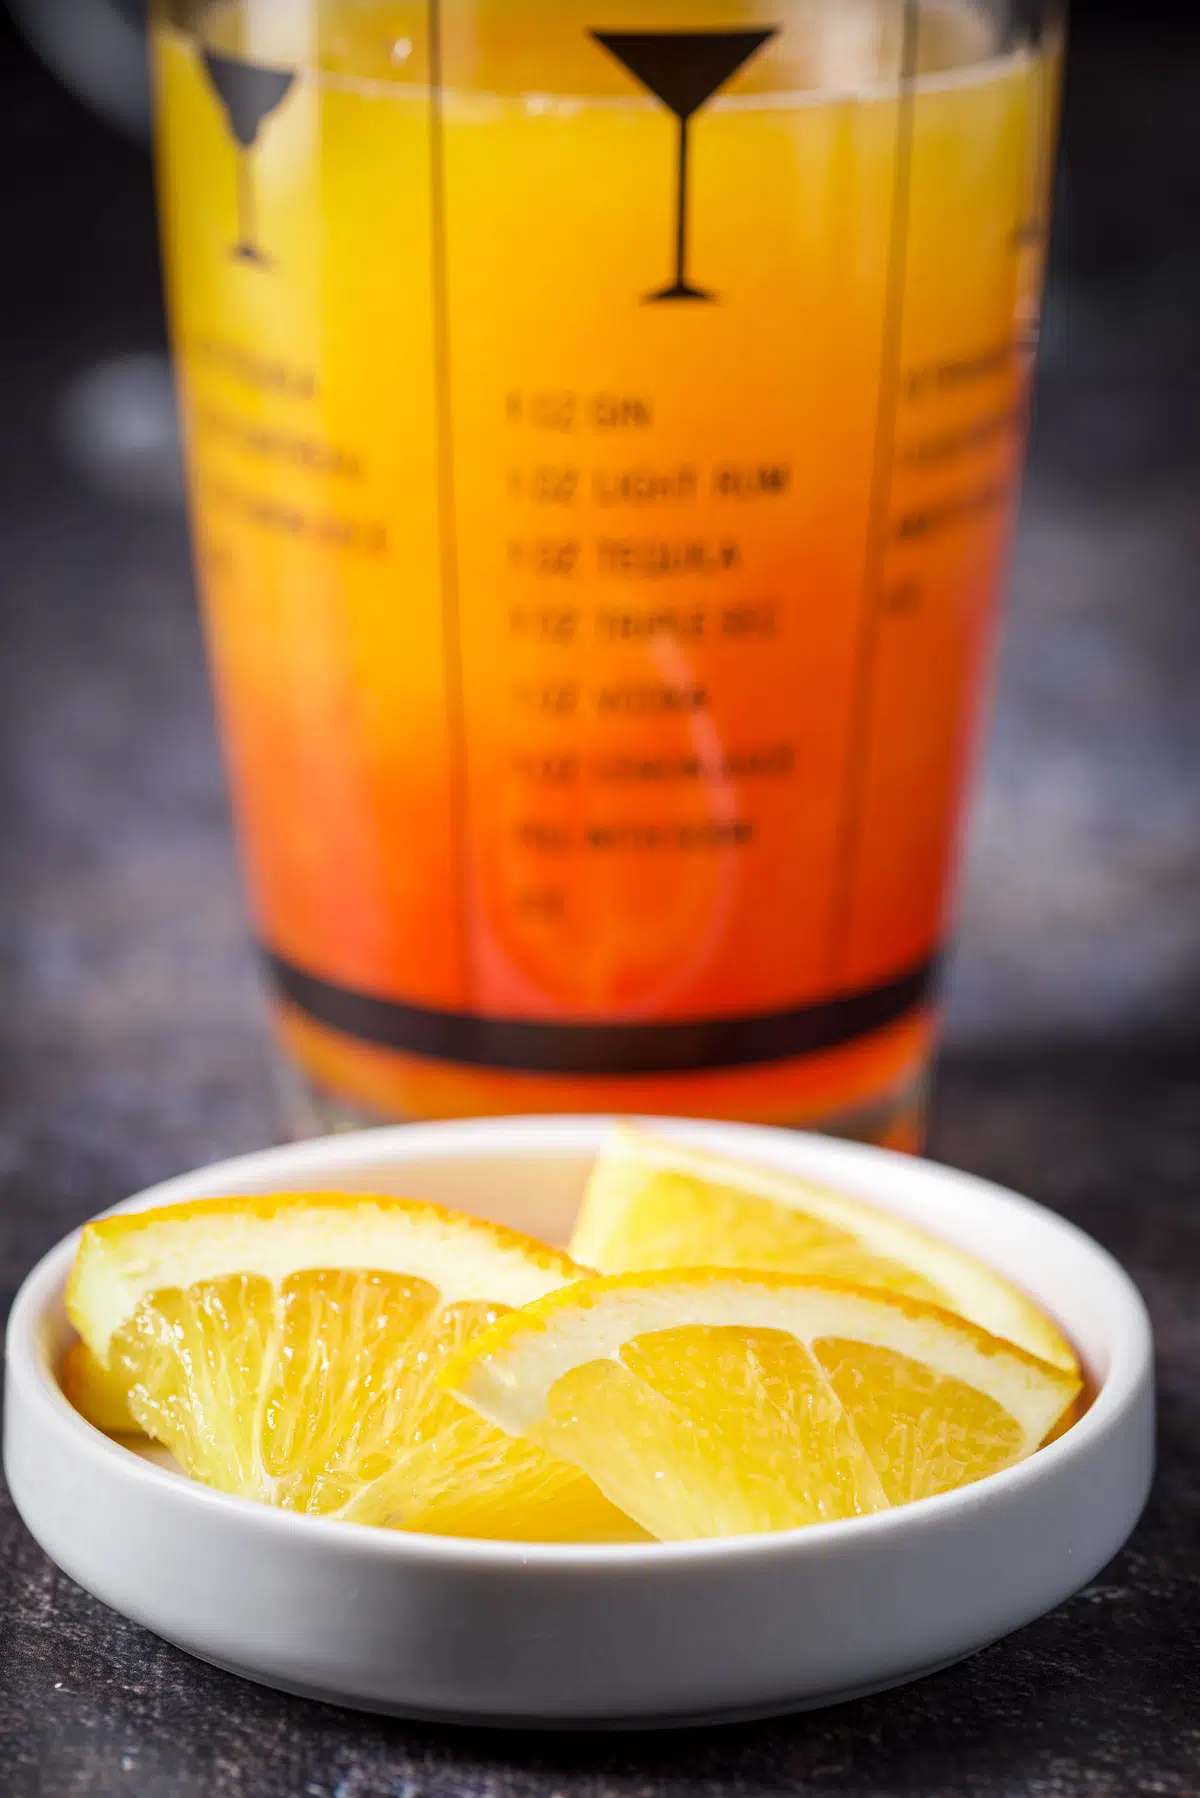 Orange slices in a white bowl with the cocktail shaker filled with the hurricane